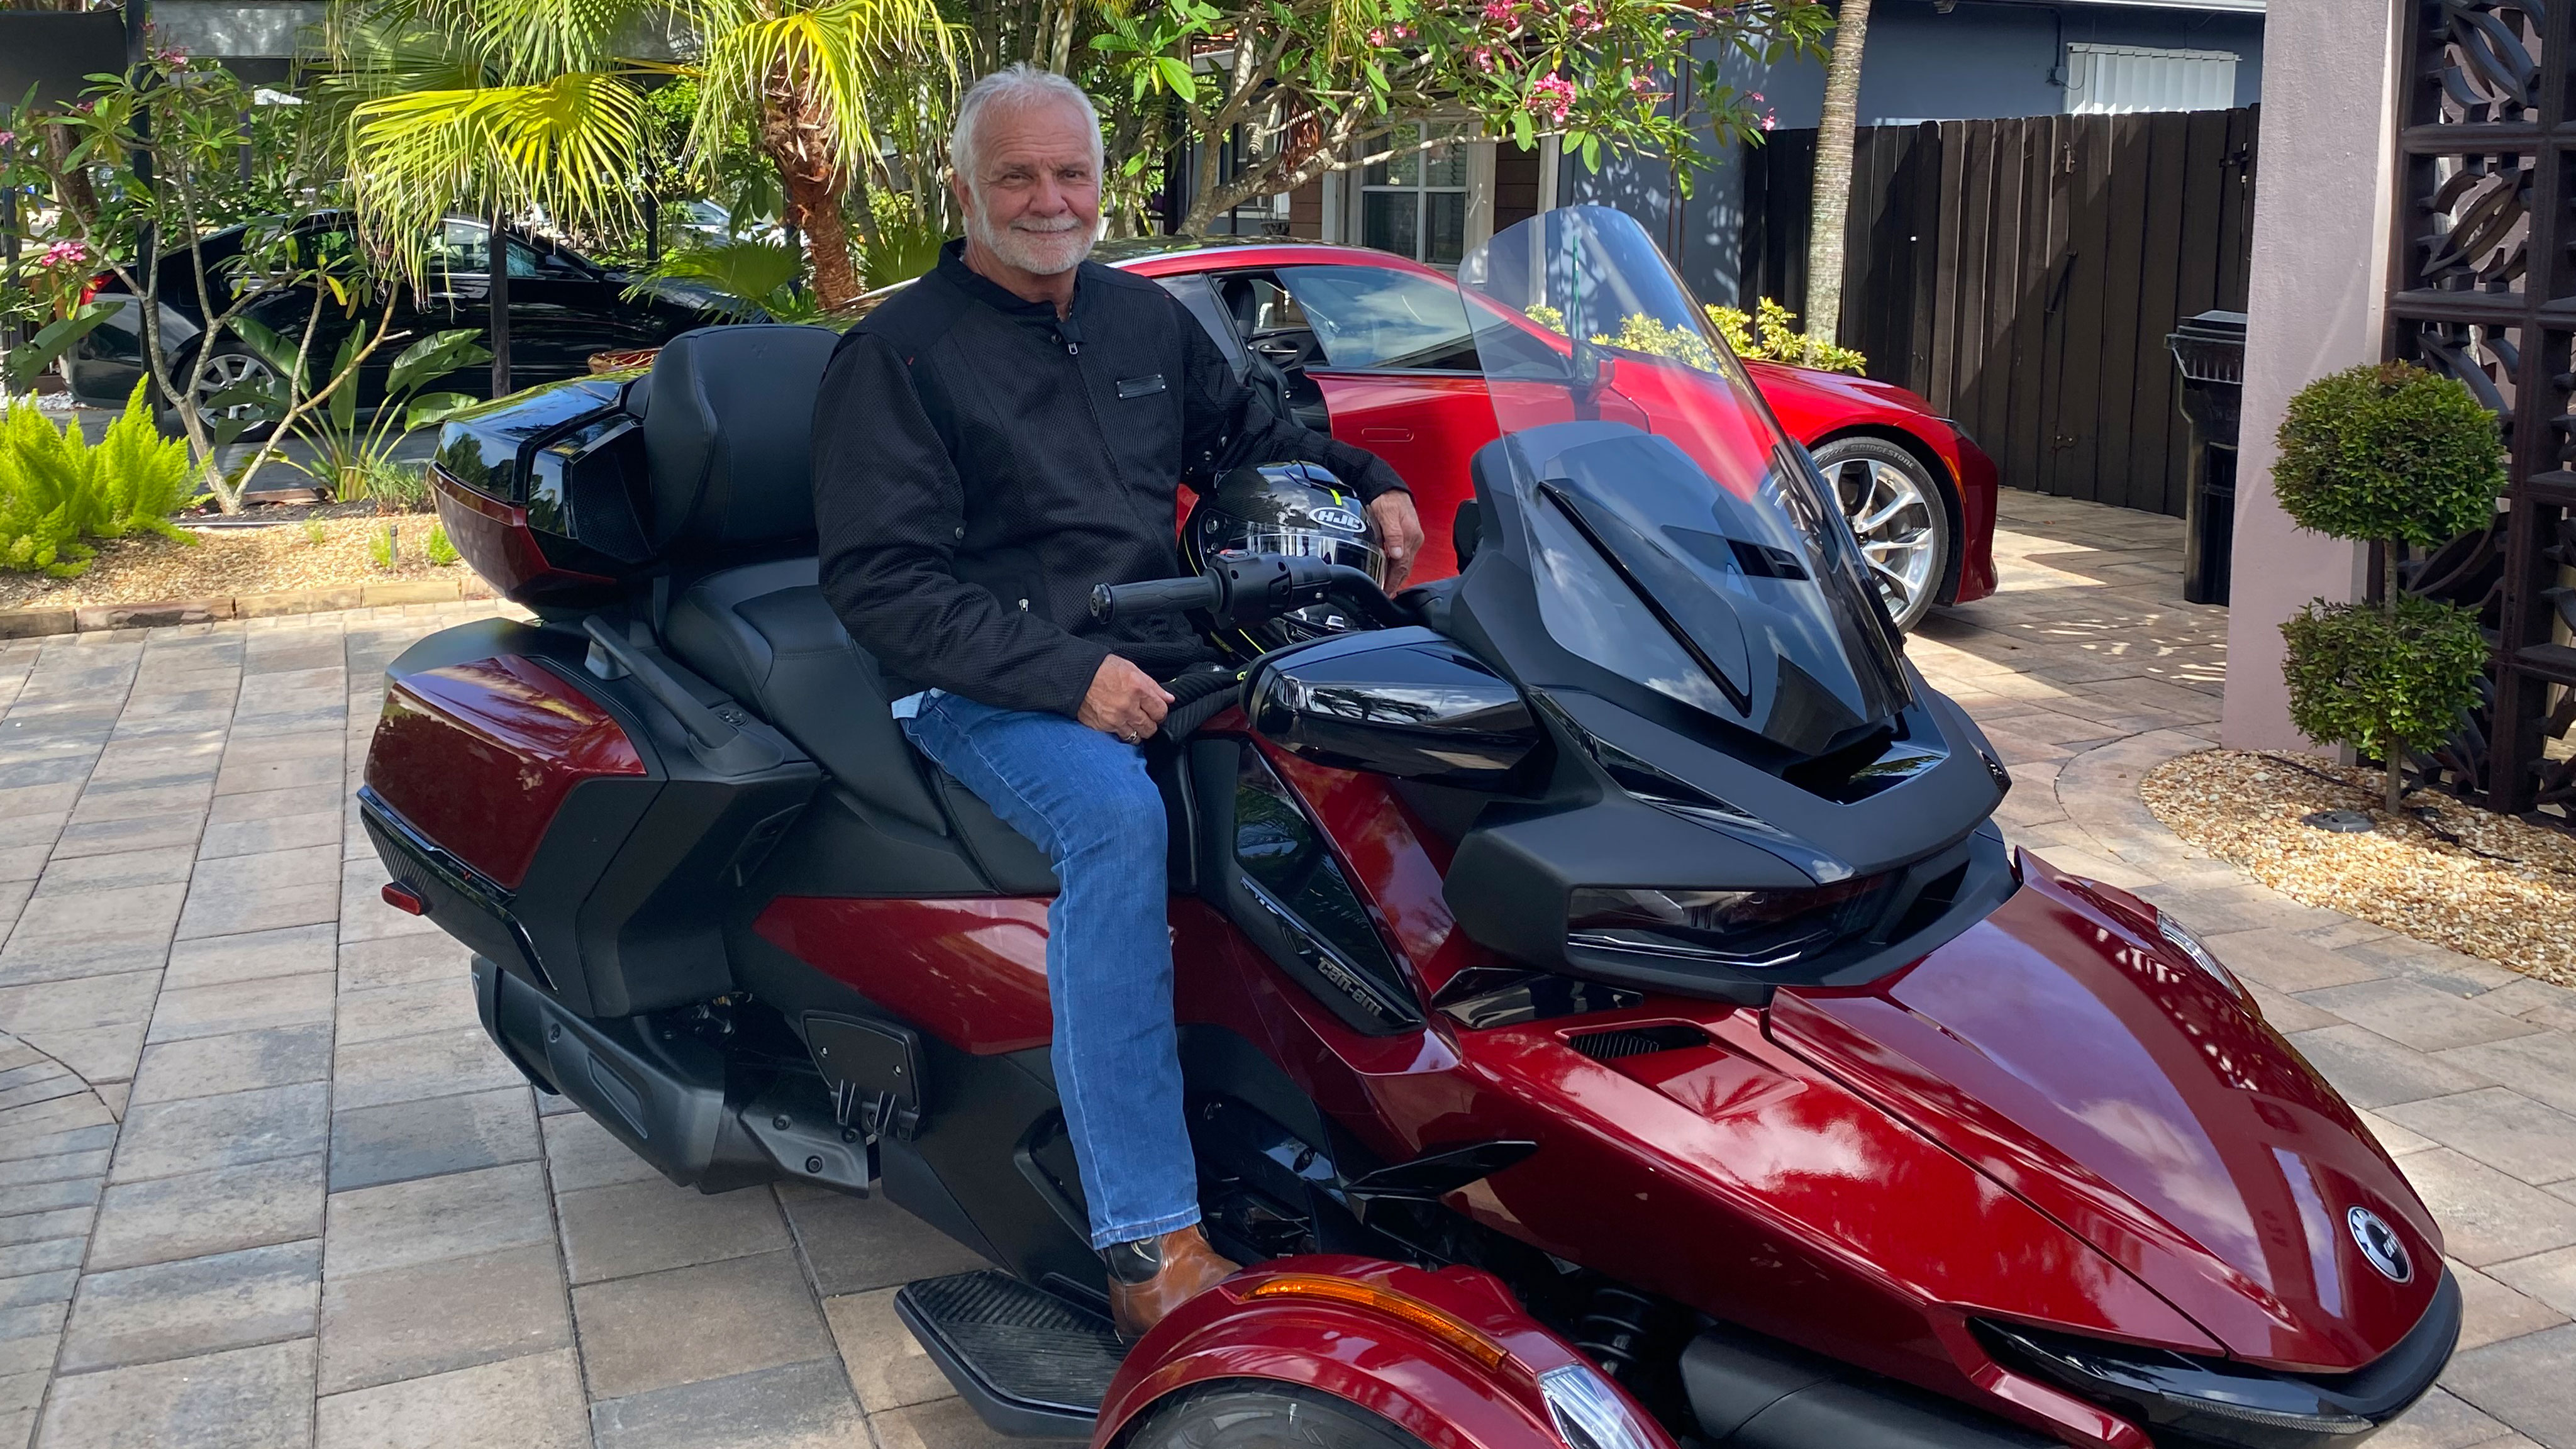 Captain Lee Rosbach posing with his Spyder